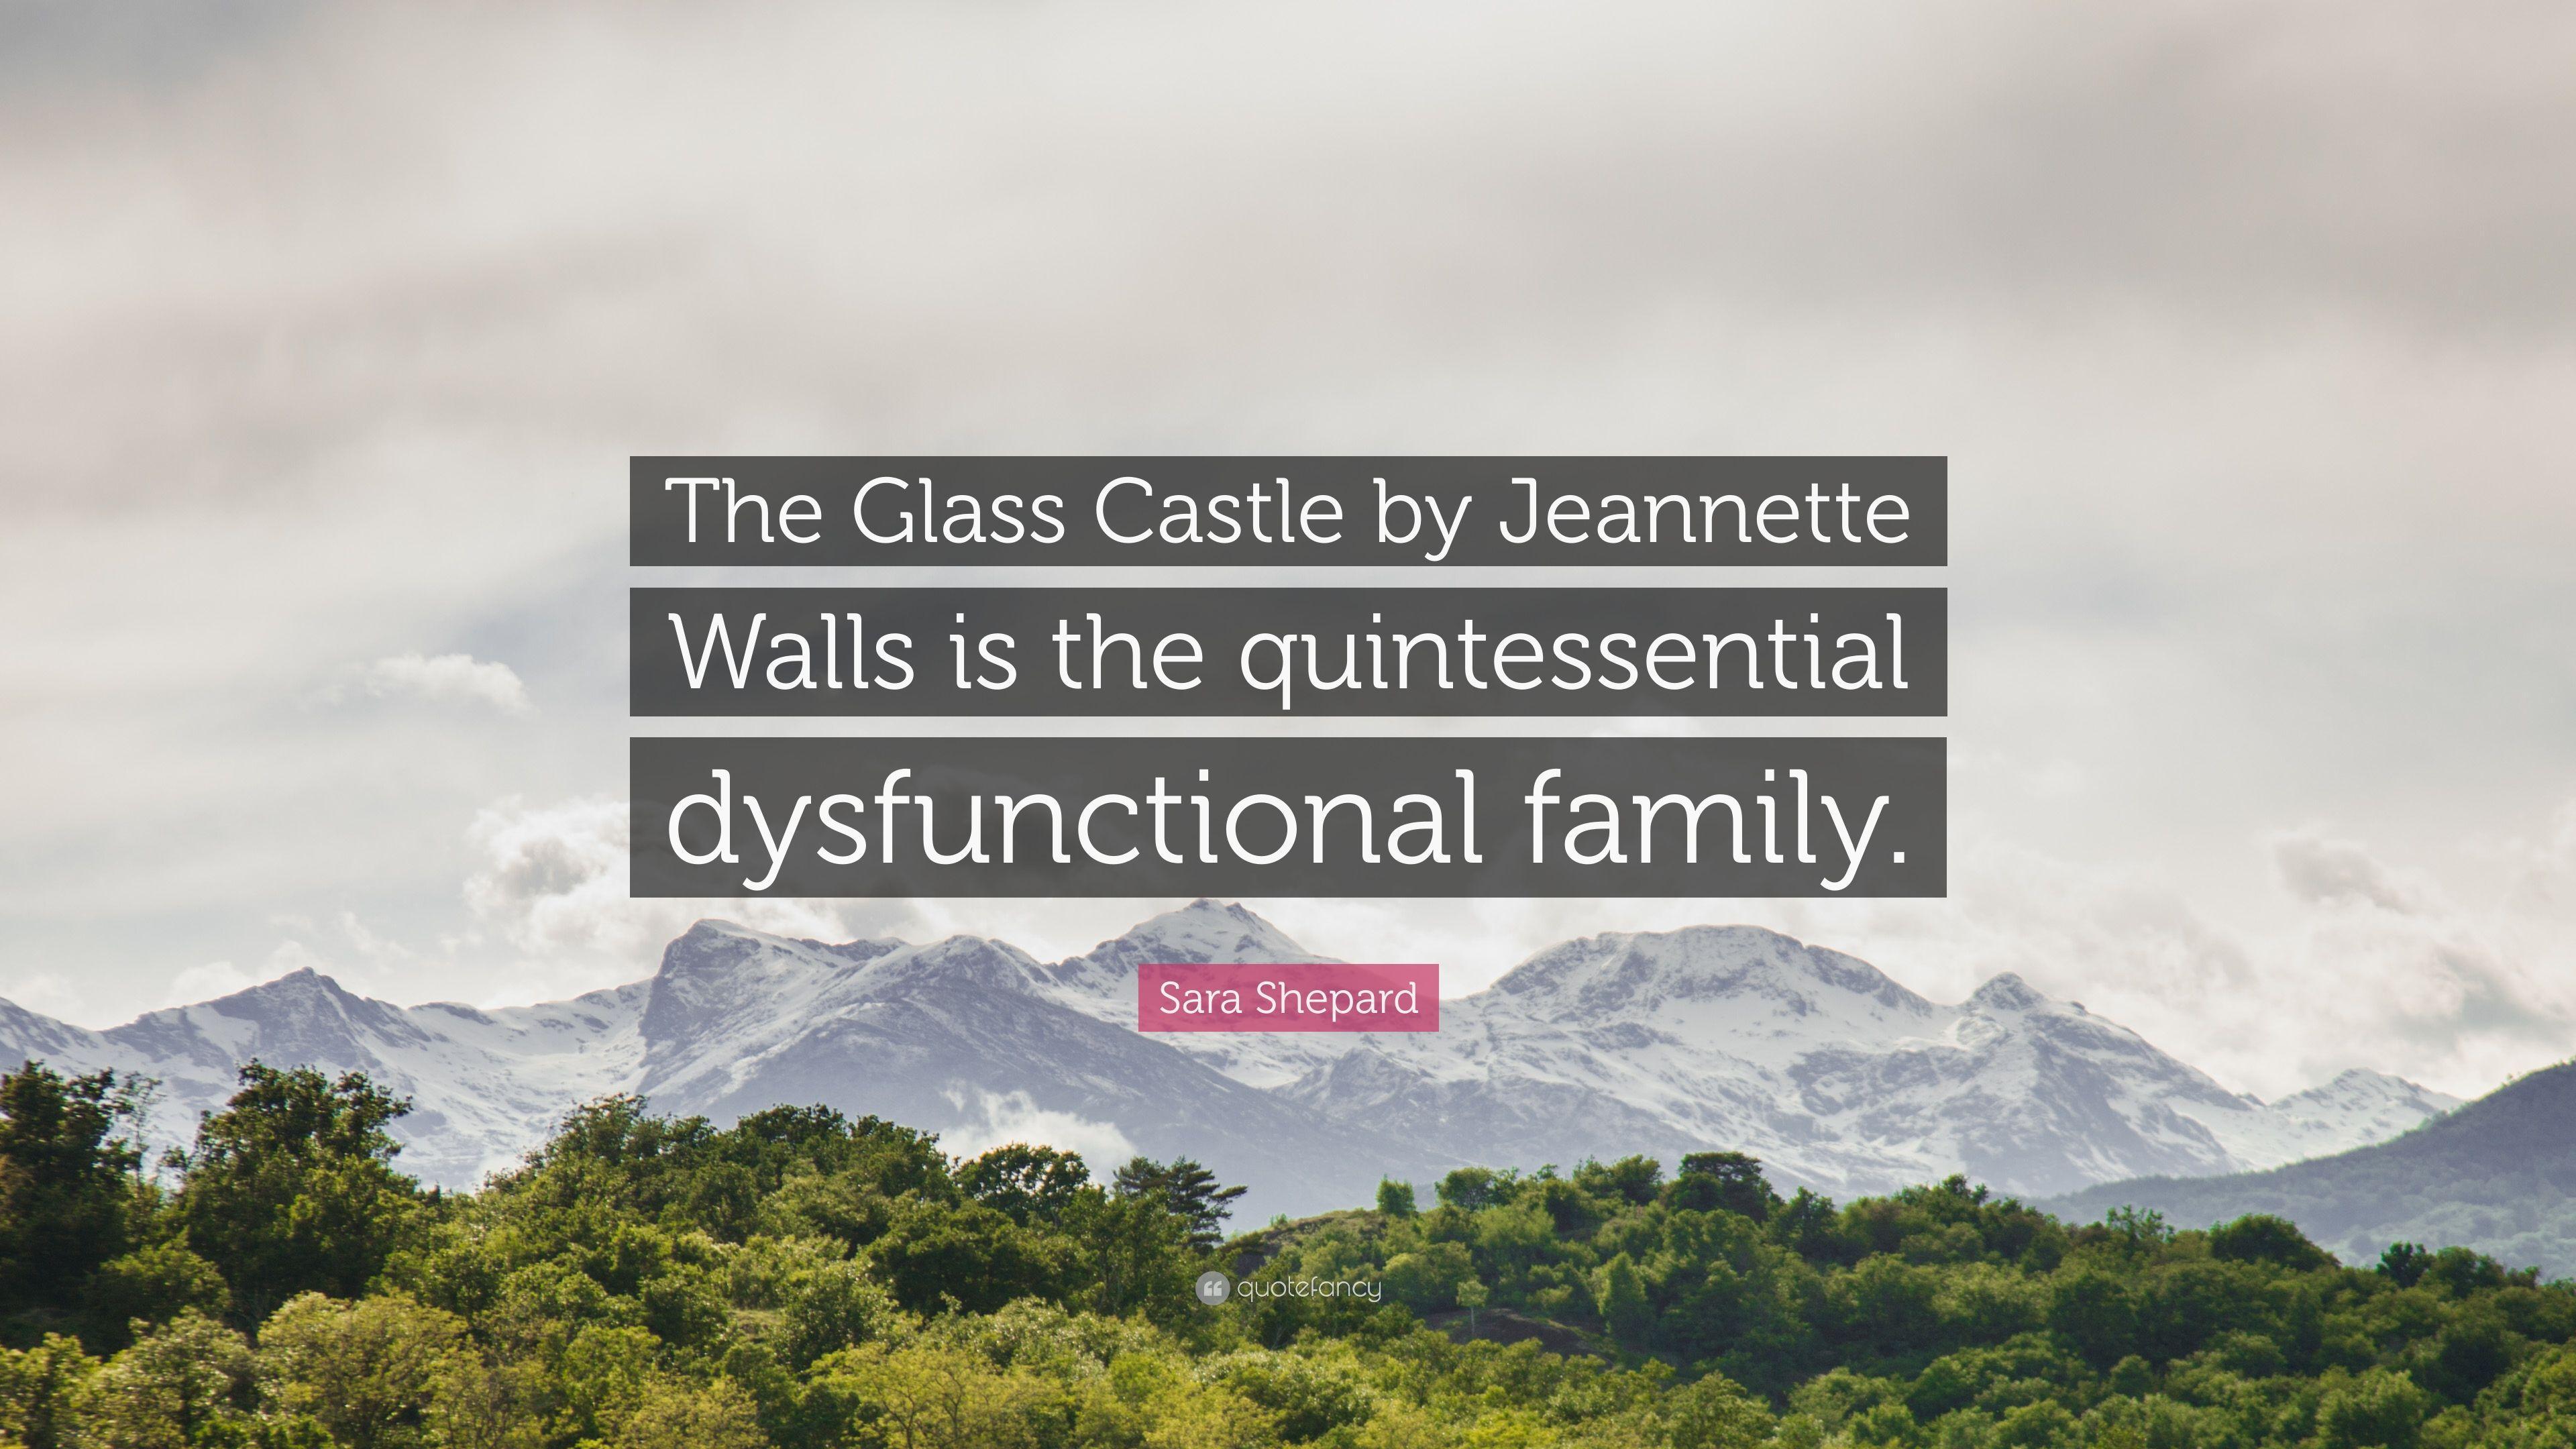 Sara Shepard Quote: “The Glass Castle by Jeannette Walls is